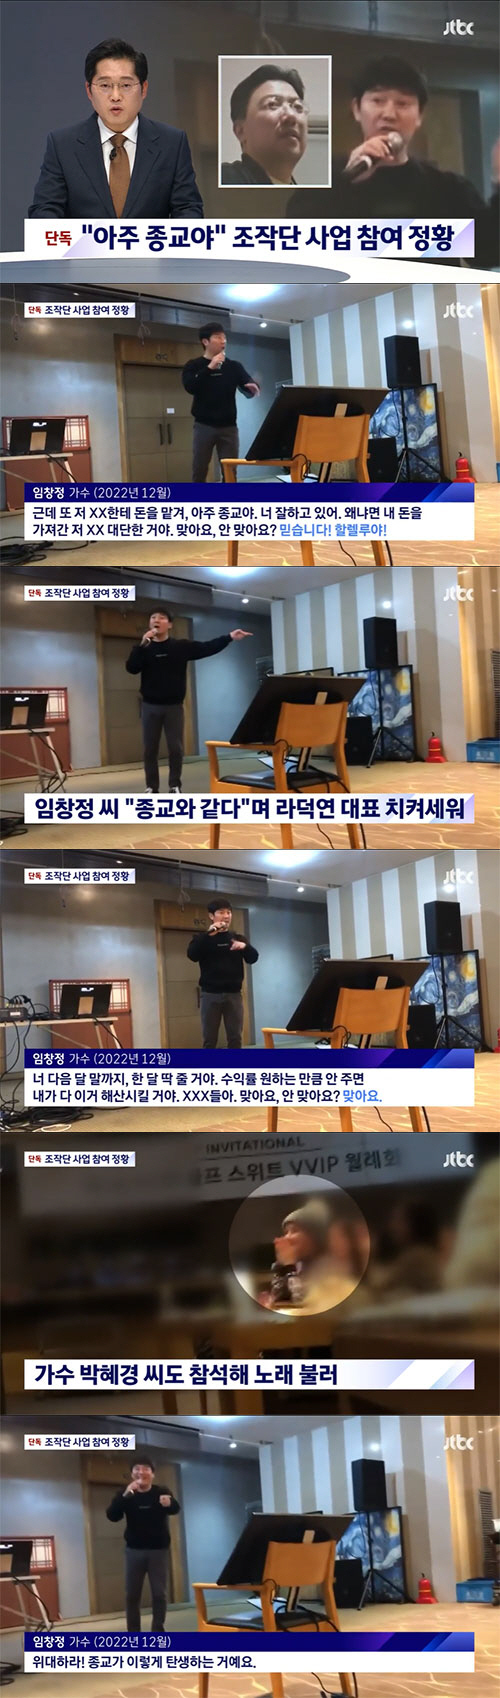 Singer Im Chang-jung complained that he owed 6 billion won from the sharing stage, and for a while, an event video showing praise for the sharing stage was released, raising the wave of the wave.JTBC The Newsroom, which was broadcasted on the last day, attracted interest by releasing a video in which Im Chang-jung participated in an investment event held by Sharesoperating stage as well as making remarks to raise the representative of Sharesoperating stage.JTBC said, If you look at the additional video, Im Chang-jung does not seem to be a simple investor. He said that the representative of the Shares manipulation group is a religion, and Hallelujah came out.In fact, in a video released through JTBC The Newsroom, Im Chang-jung said, Leave the money to that XX. Its Savoie religion. Youre doing well, because that XX who took my money is great.I believe Hallelujah, he said.In addition, Im Chang-jung revealed to the CEO that he was guaranteed a profit rate, and he said, You will give me a month until the end of next month. If you do not give me the profit rate, I will dissolve it. XXX.Right, is not it? Great! This is how religion is born.Above all, JTBCs video attracted attention not only because of the praise of Im Chang-jungs representative Rah Deok-yeon, but also because of the fact that singer Park Hye-kyung, who was involved in the controversy about the sharing stage with Im Chang-jung, attended the event and sang.JTBC said, Park Hye-kyung attended while moving the agency. Im Chang-jung showed a different temperature difference.Im Chang-jung was involved in the Shares manipulation case last November and bought public consensus.Instead of selling a portion of Jasins entertainment companys stake for 5 billion won, he participated in the manipulation of Shares by reinvesting 3 billion won in shares manipulation force of influences.However, Im Chang-jung complained that he was Victims in the Shares manipulation case.He invested 1.5 billion won in the account of Jasin and his wife, but as a result, he was in debt of 6 billion won, claiming it was Victims of the Shares manipulation case.SBS released a video showing Im Chang-jung attending the Investment Event held by Sharesoperating stage, and soon JTBC also released the video, suggesting that the lease is deeply involved in the Sharesoperating stage event.The Newsroom reported that Im Chang-jung was one of the people deeply involved in the Sharesoperating stage case centering on the representative of La Duk-yeon, and Im Chang-jung invested in entertainment with Mr. La Duk-yeon, and Im Chang-jungs wife Seo-jung was listed as an in-house director with Sharesoperating stage officials.In an interview with JTBC, Im Chang-jung explained, It is true that I made some misleading remarks for the sake of the meeting atmosphere at the time, but I did not encourage Investment. It is also different from the fact that I proposed a fee settlement.